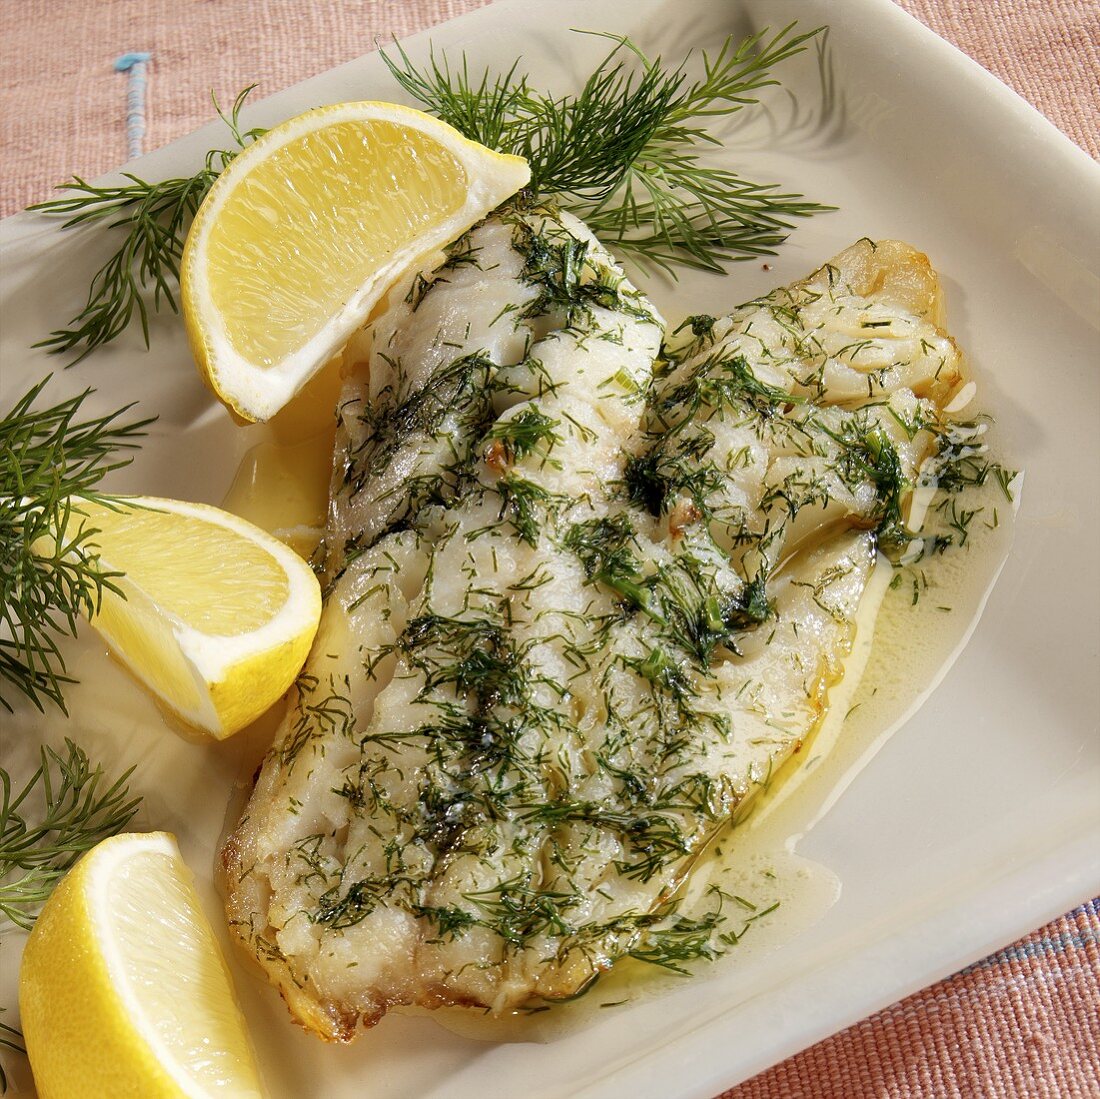 Fish fillet with dill and lemon